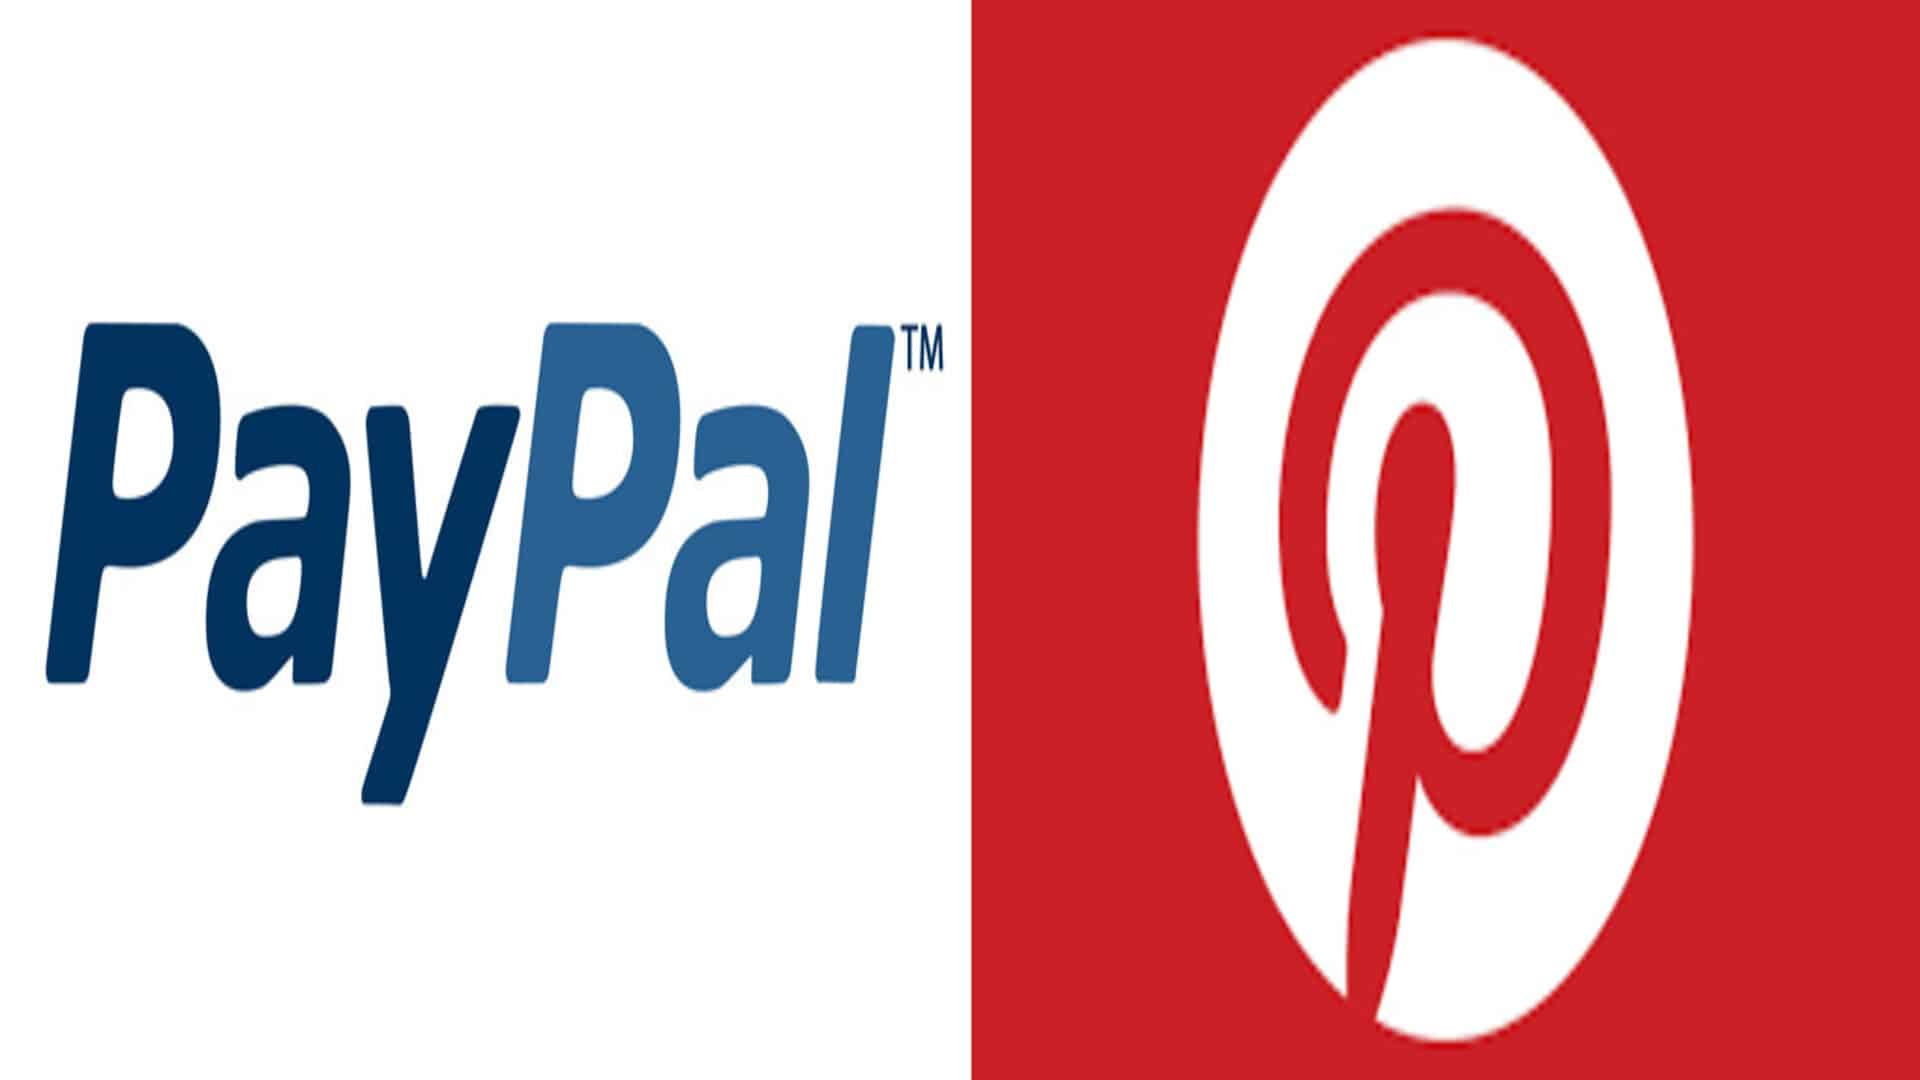 PayPal in late-stage talks for acquisition of Pinterest, deal discussions confidential